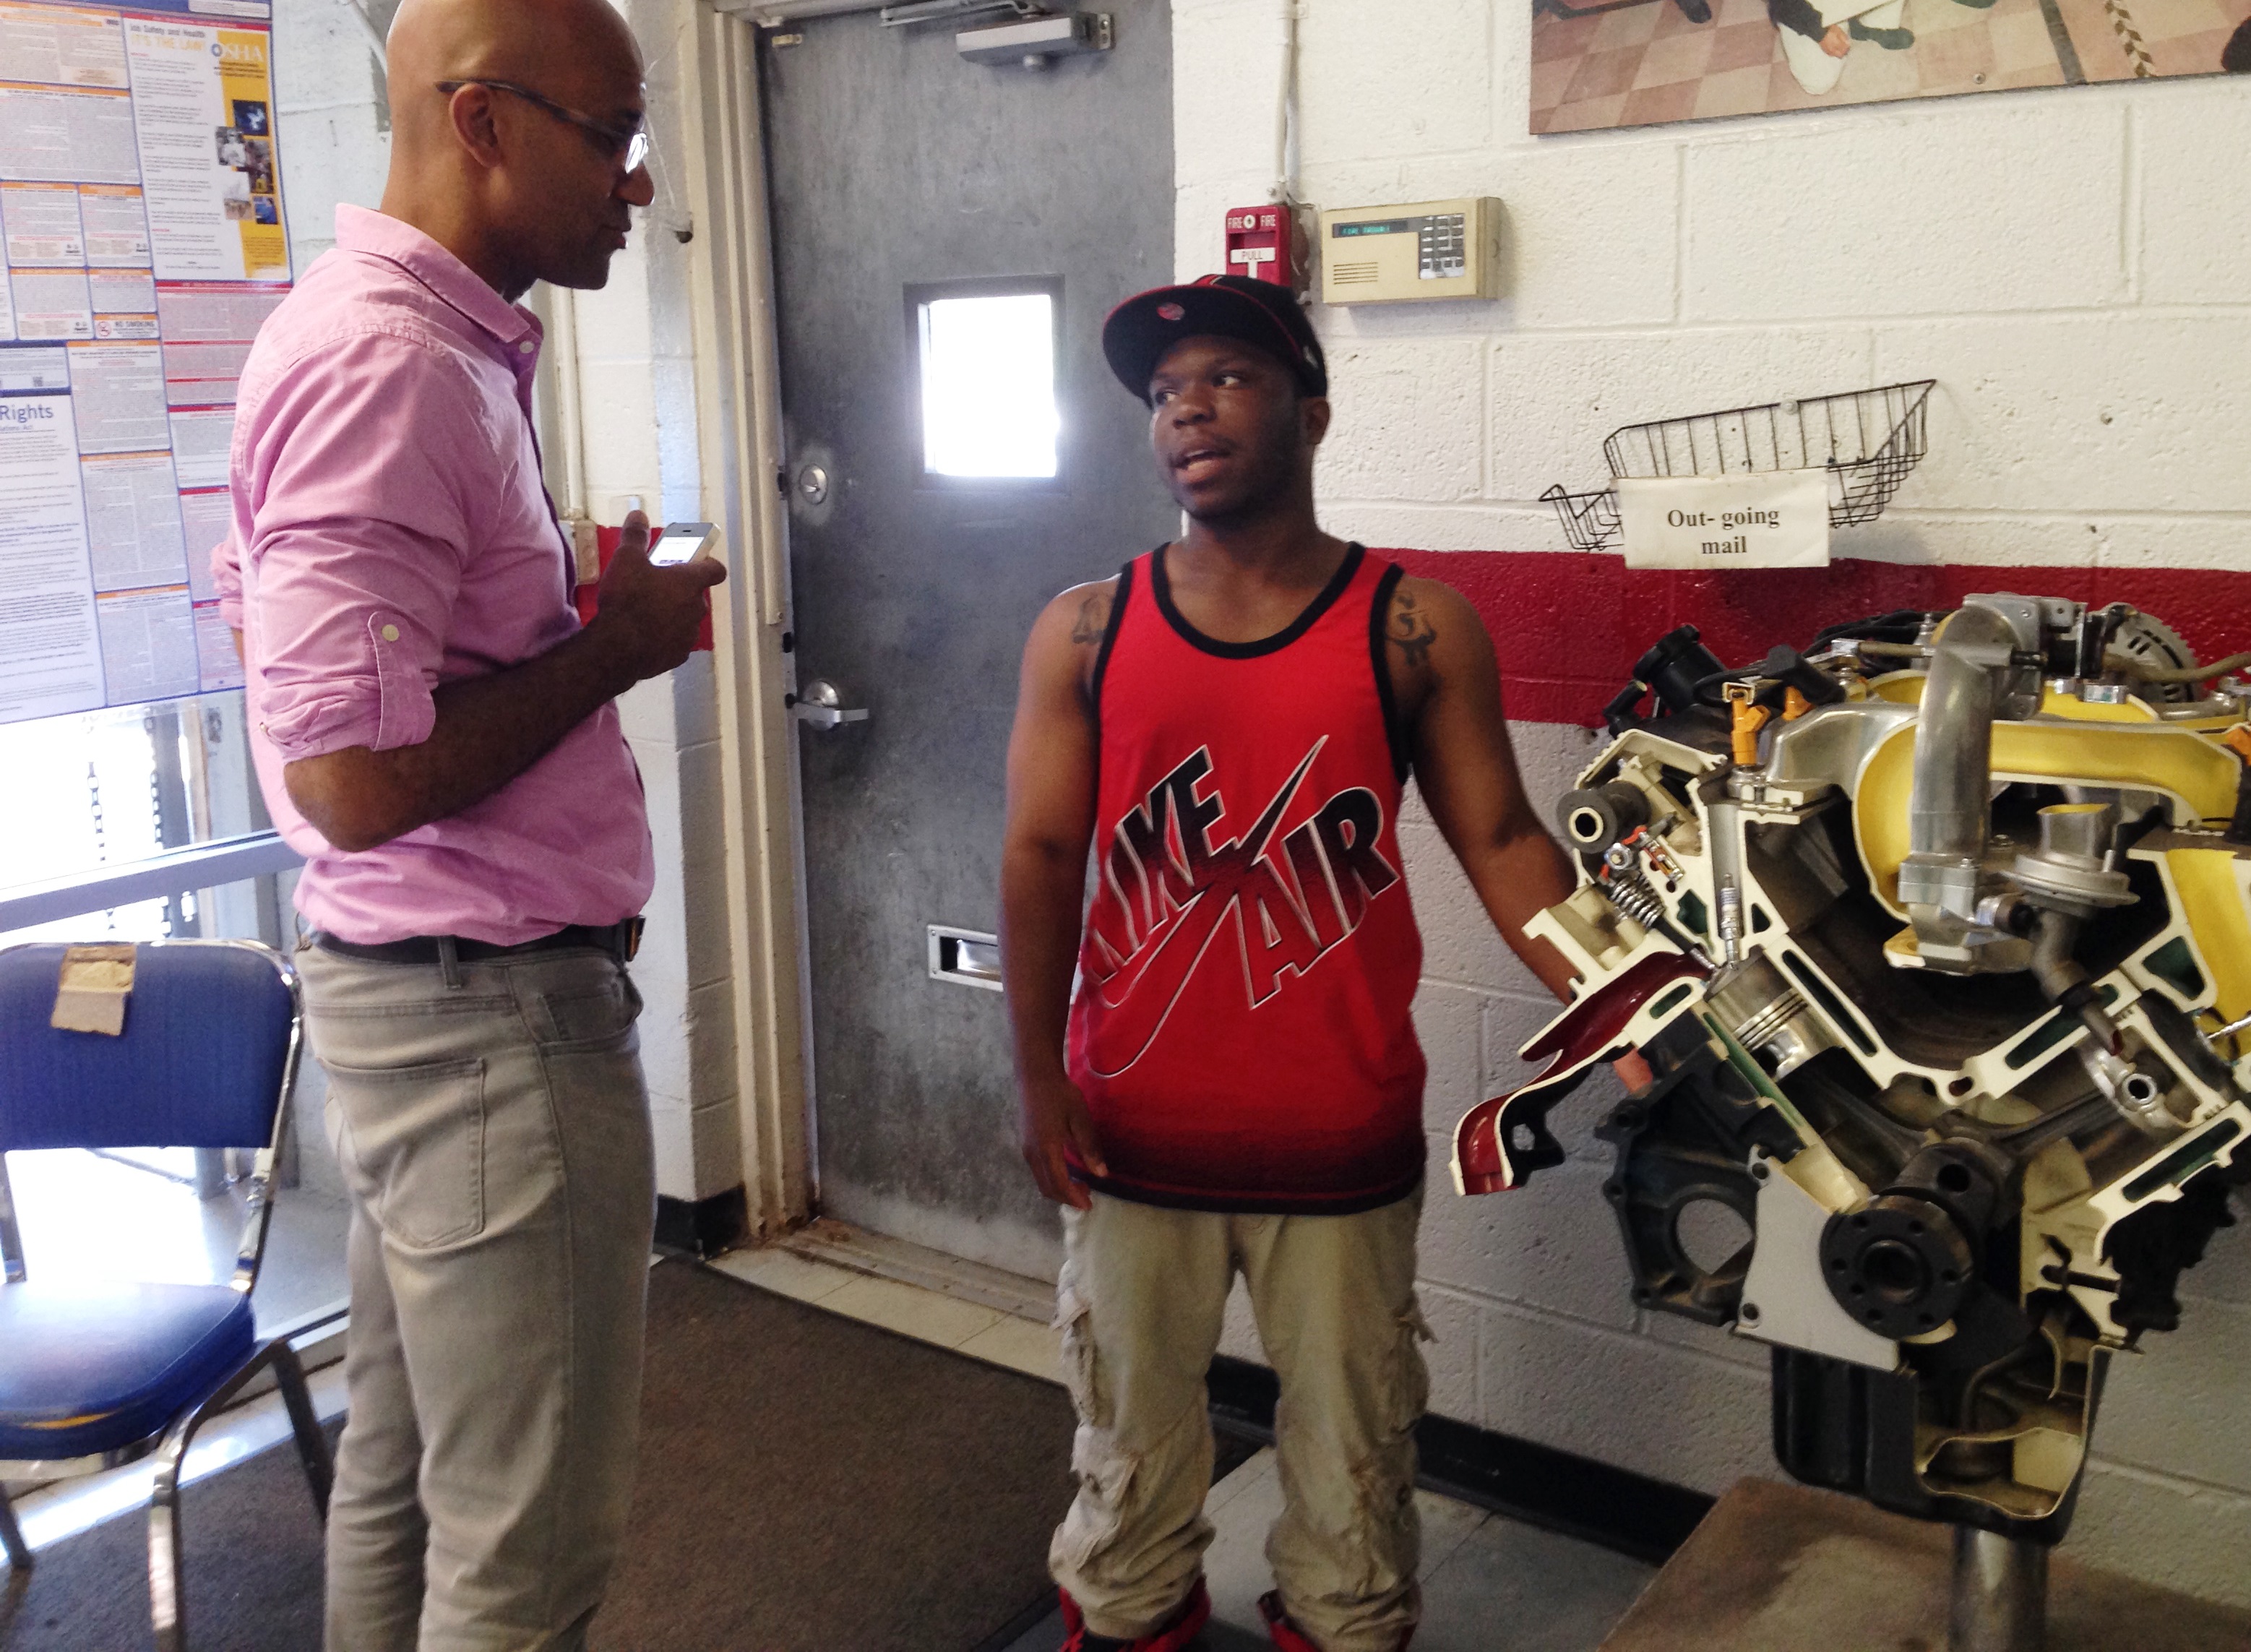 Dorian Moody, right, a recent student of NCC's Automotive Technician Employment and Training Program, speaks with Colorlines reporter Kai Wright, left.